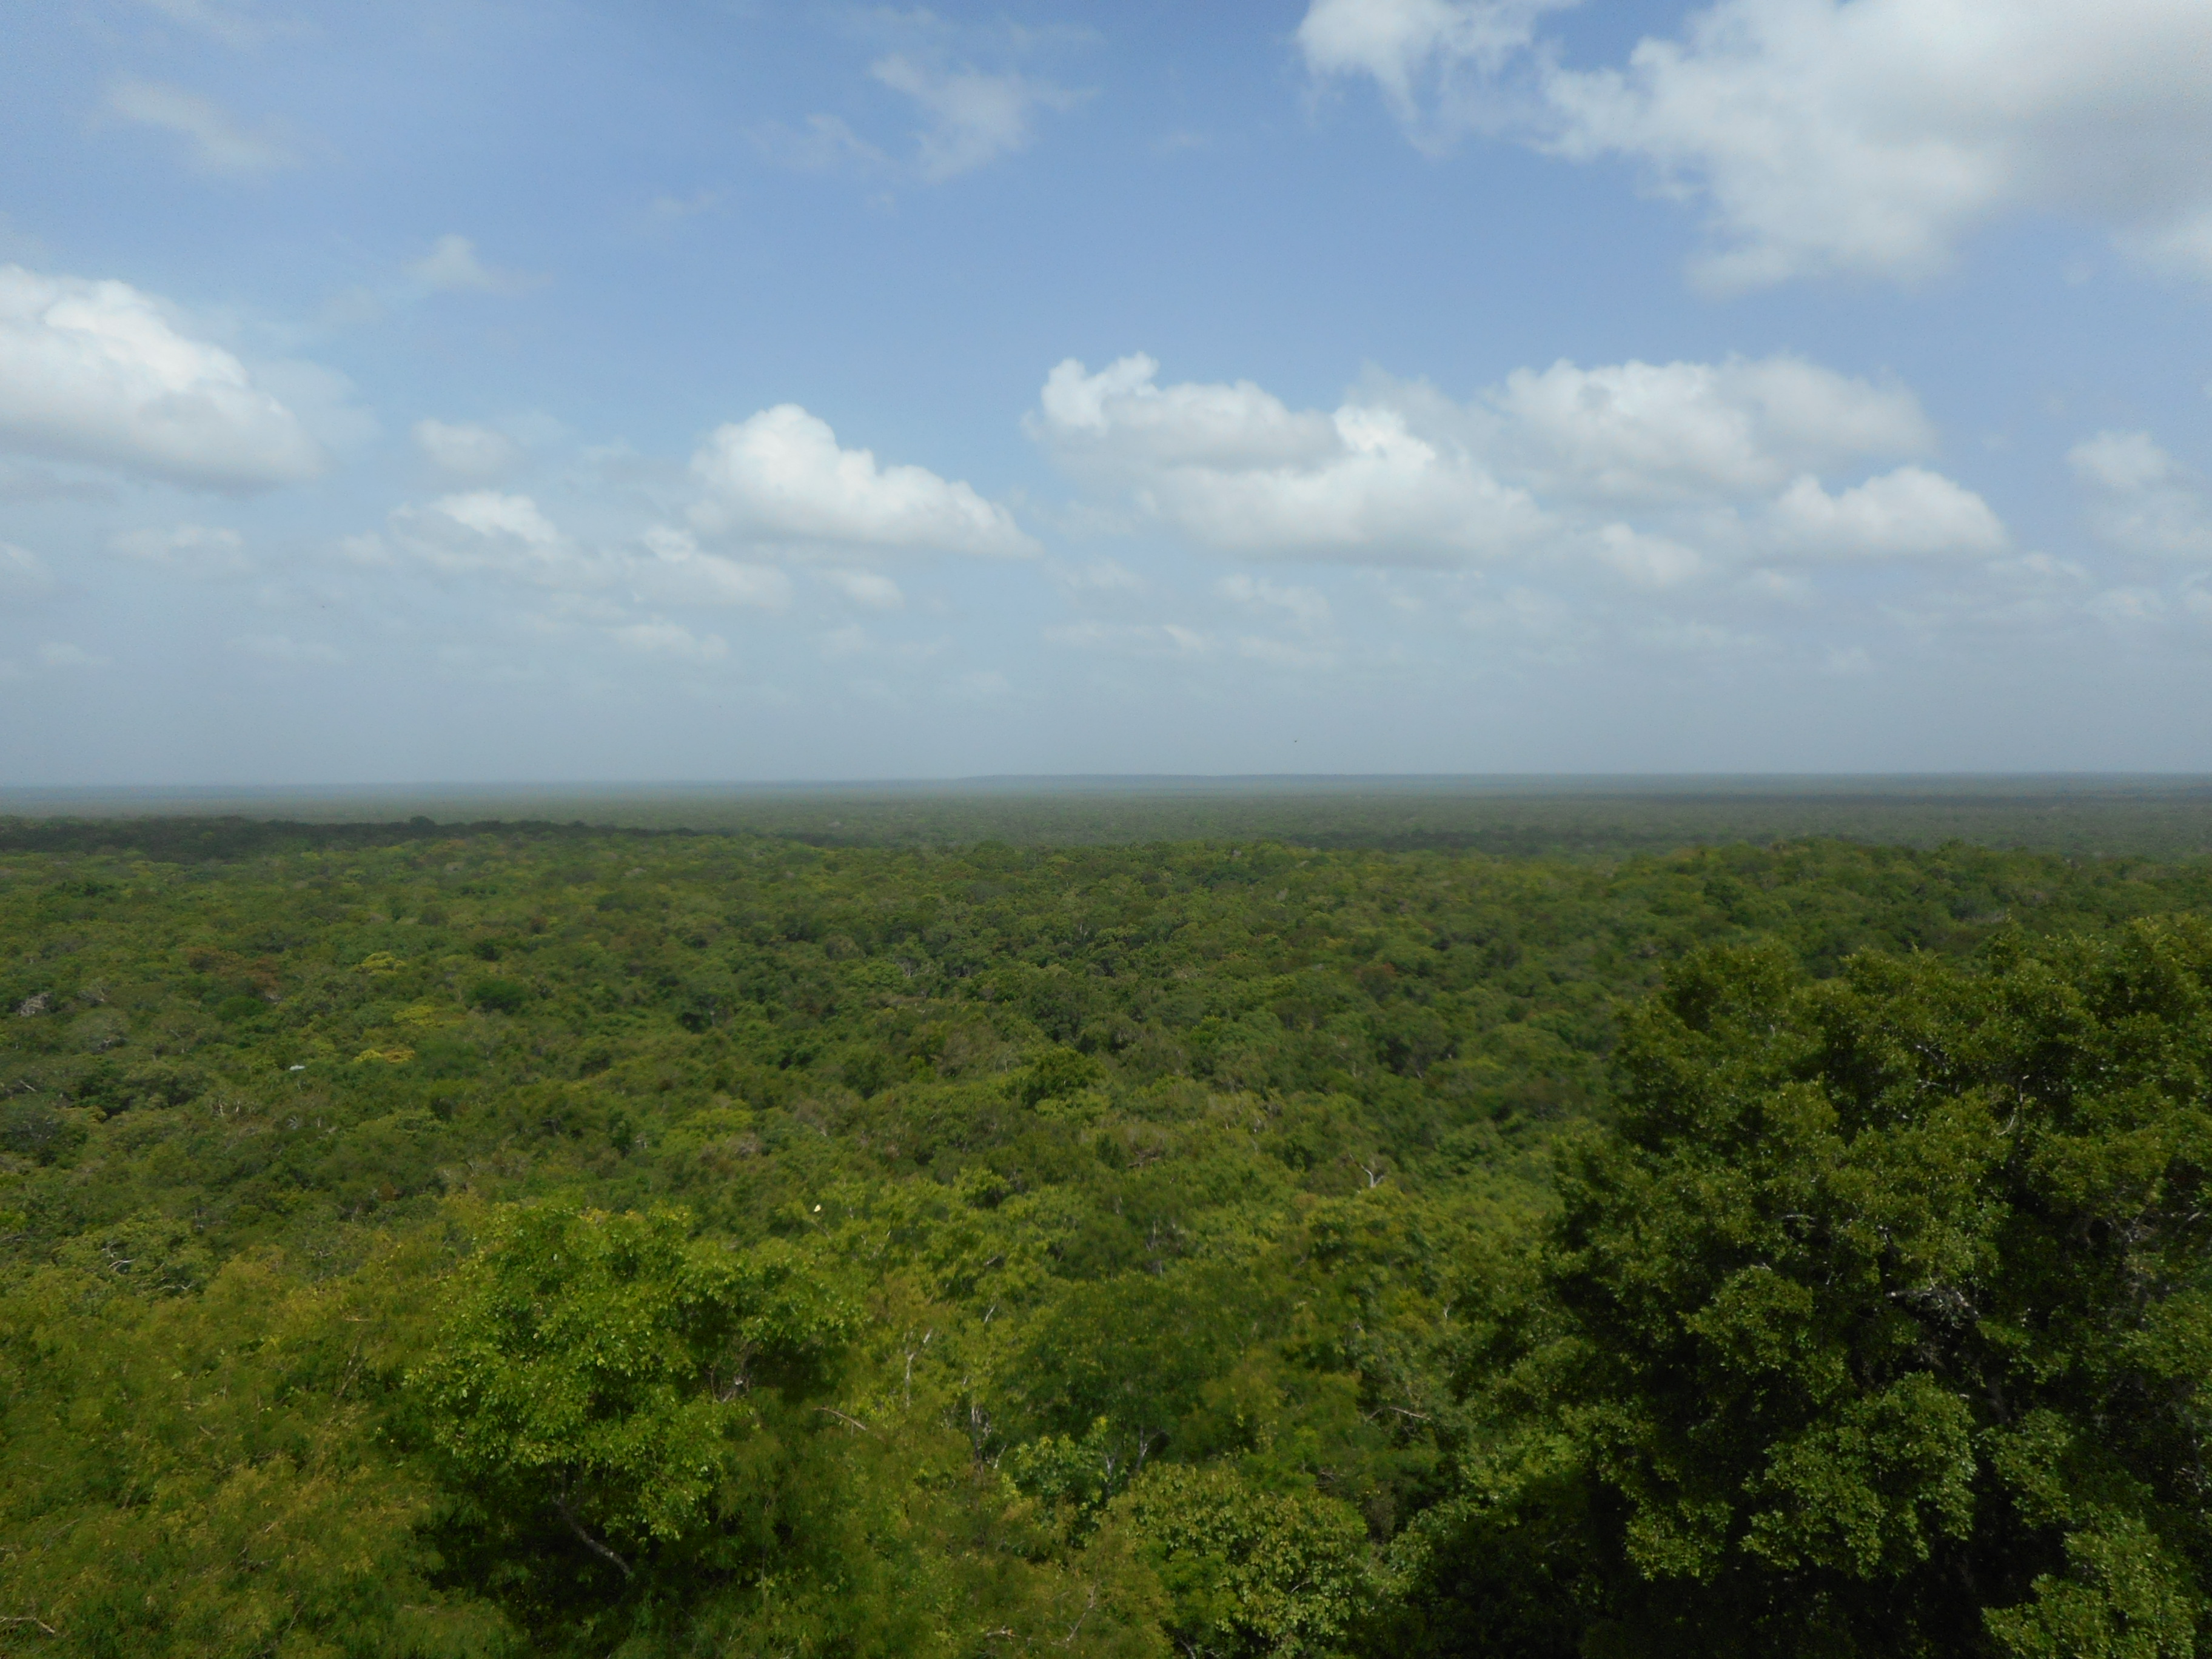 View from the top of Temple 2 at Calakmul, showing the extensive tropical forest.